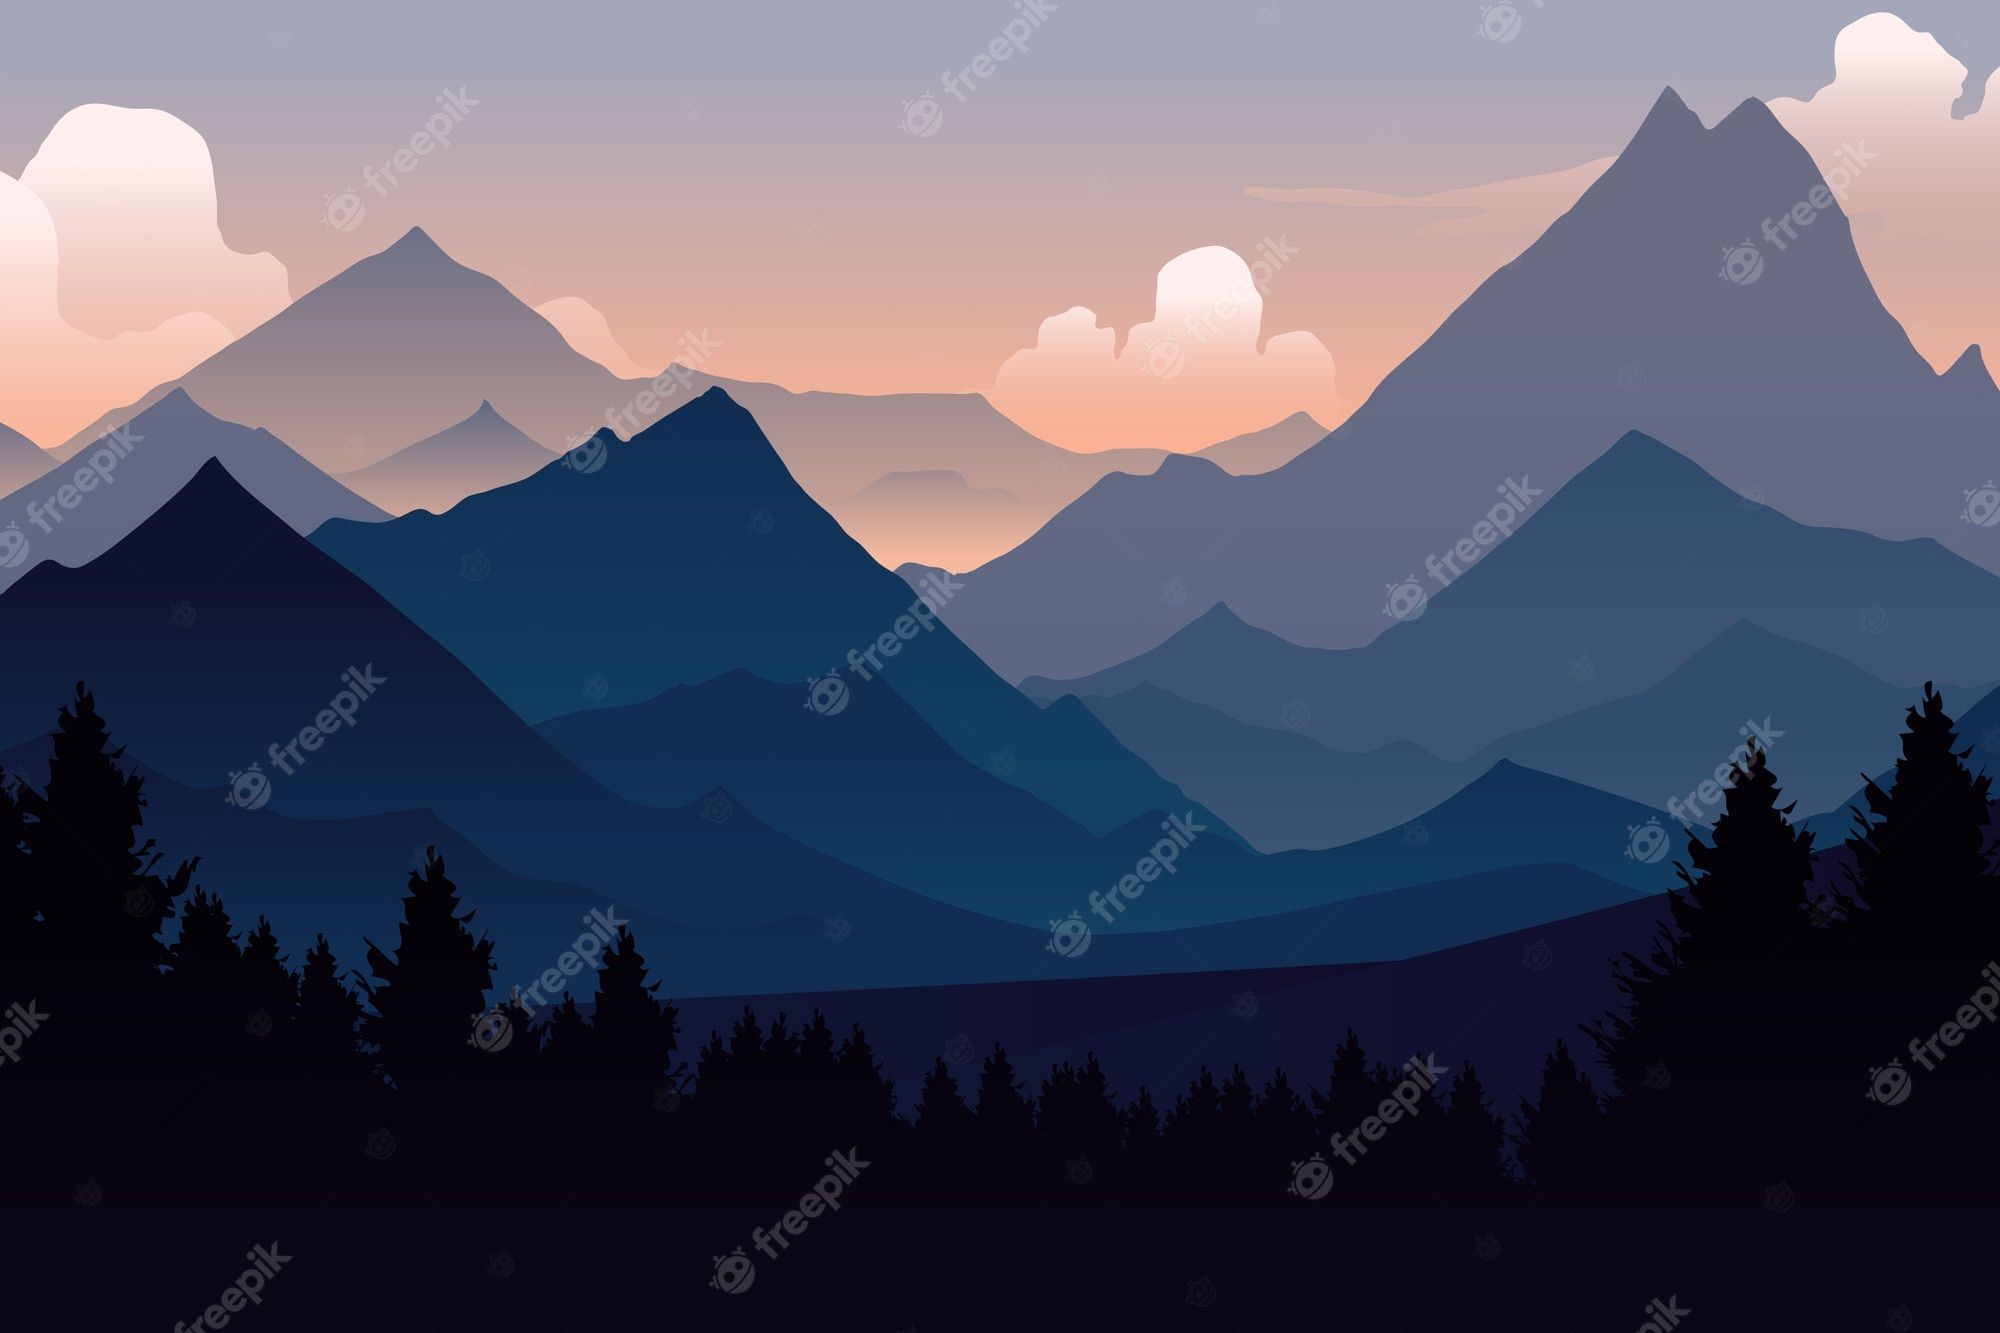 Mountain wallpaper Vectors & Illustrations for Free Download